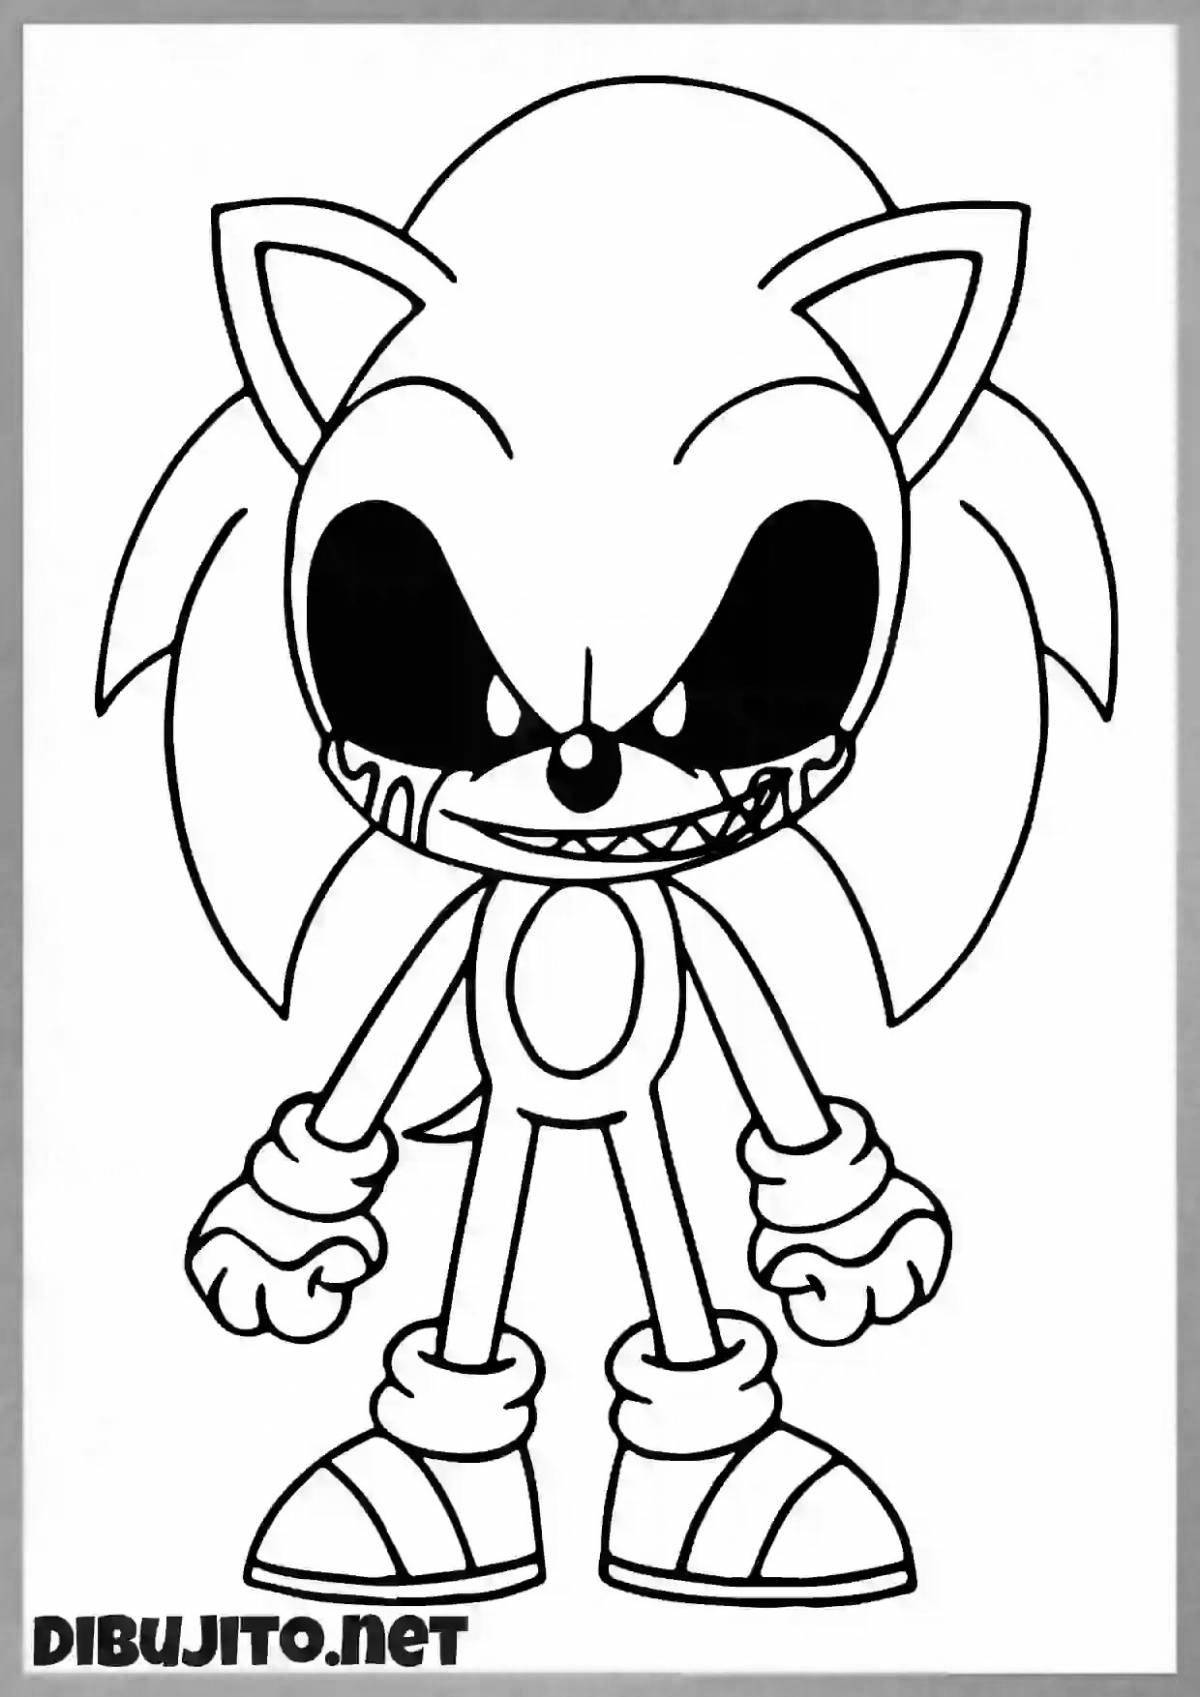 Super sonic exe animated coloring book